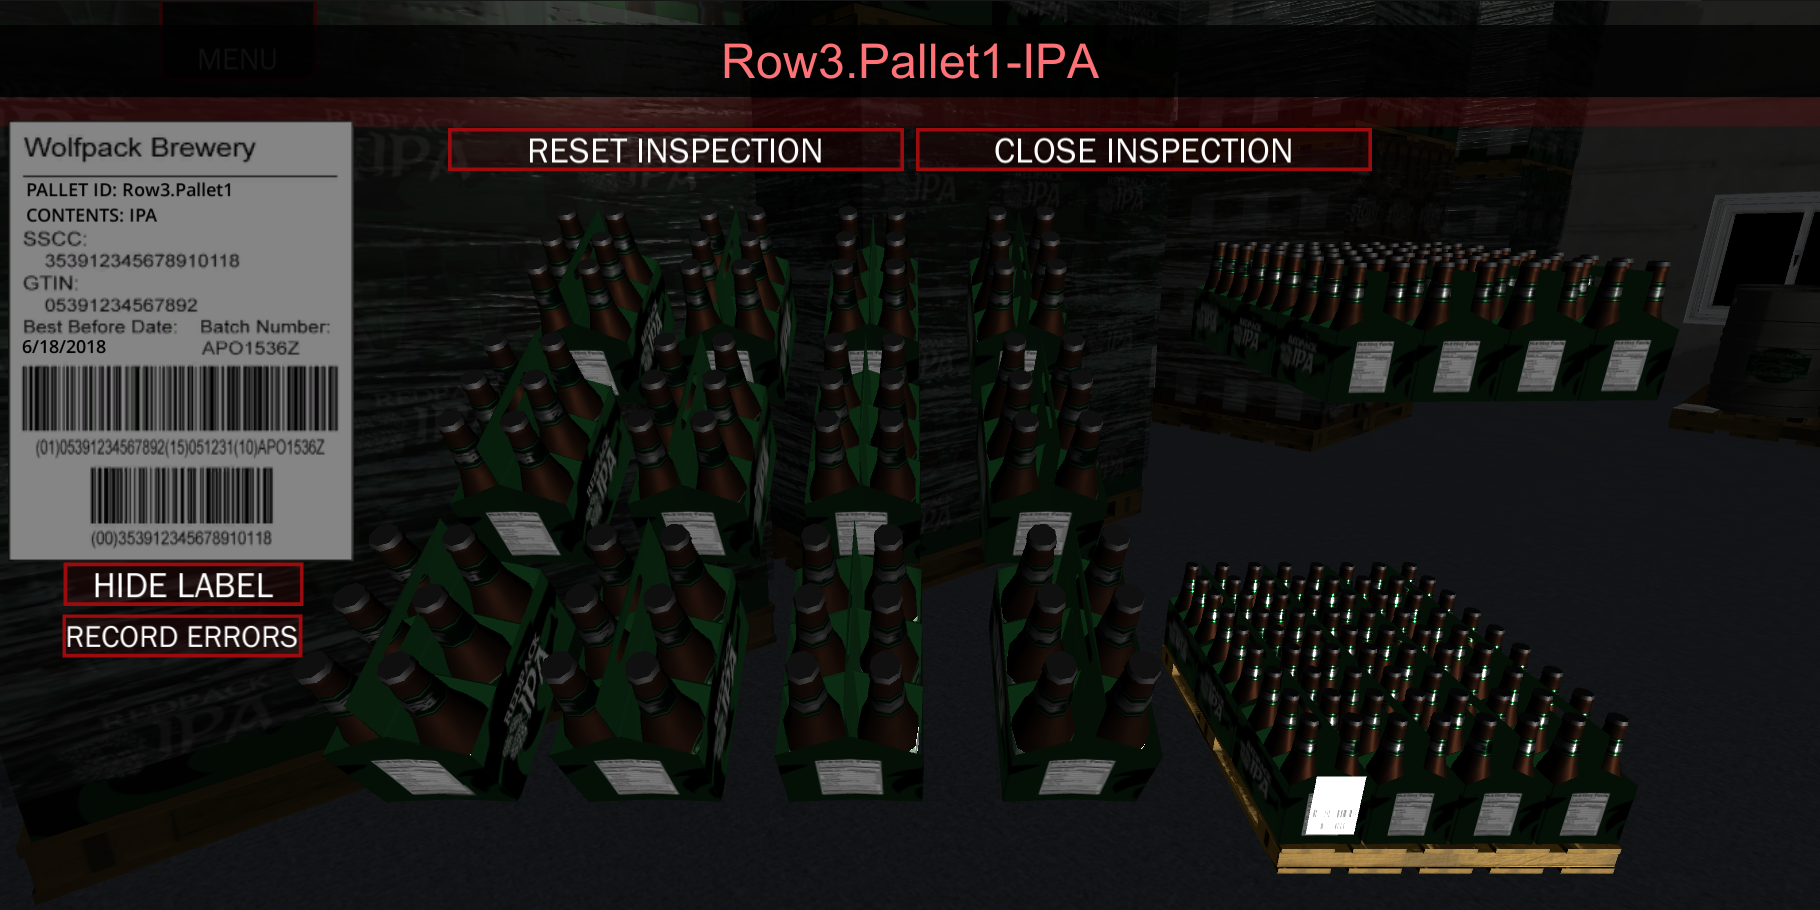 Inspection view of one of the pallets